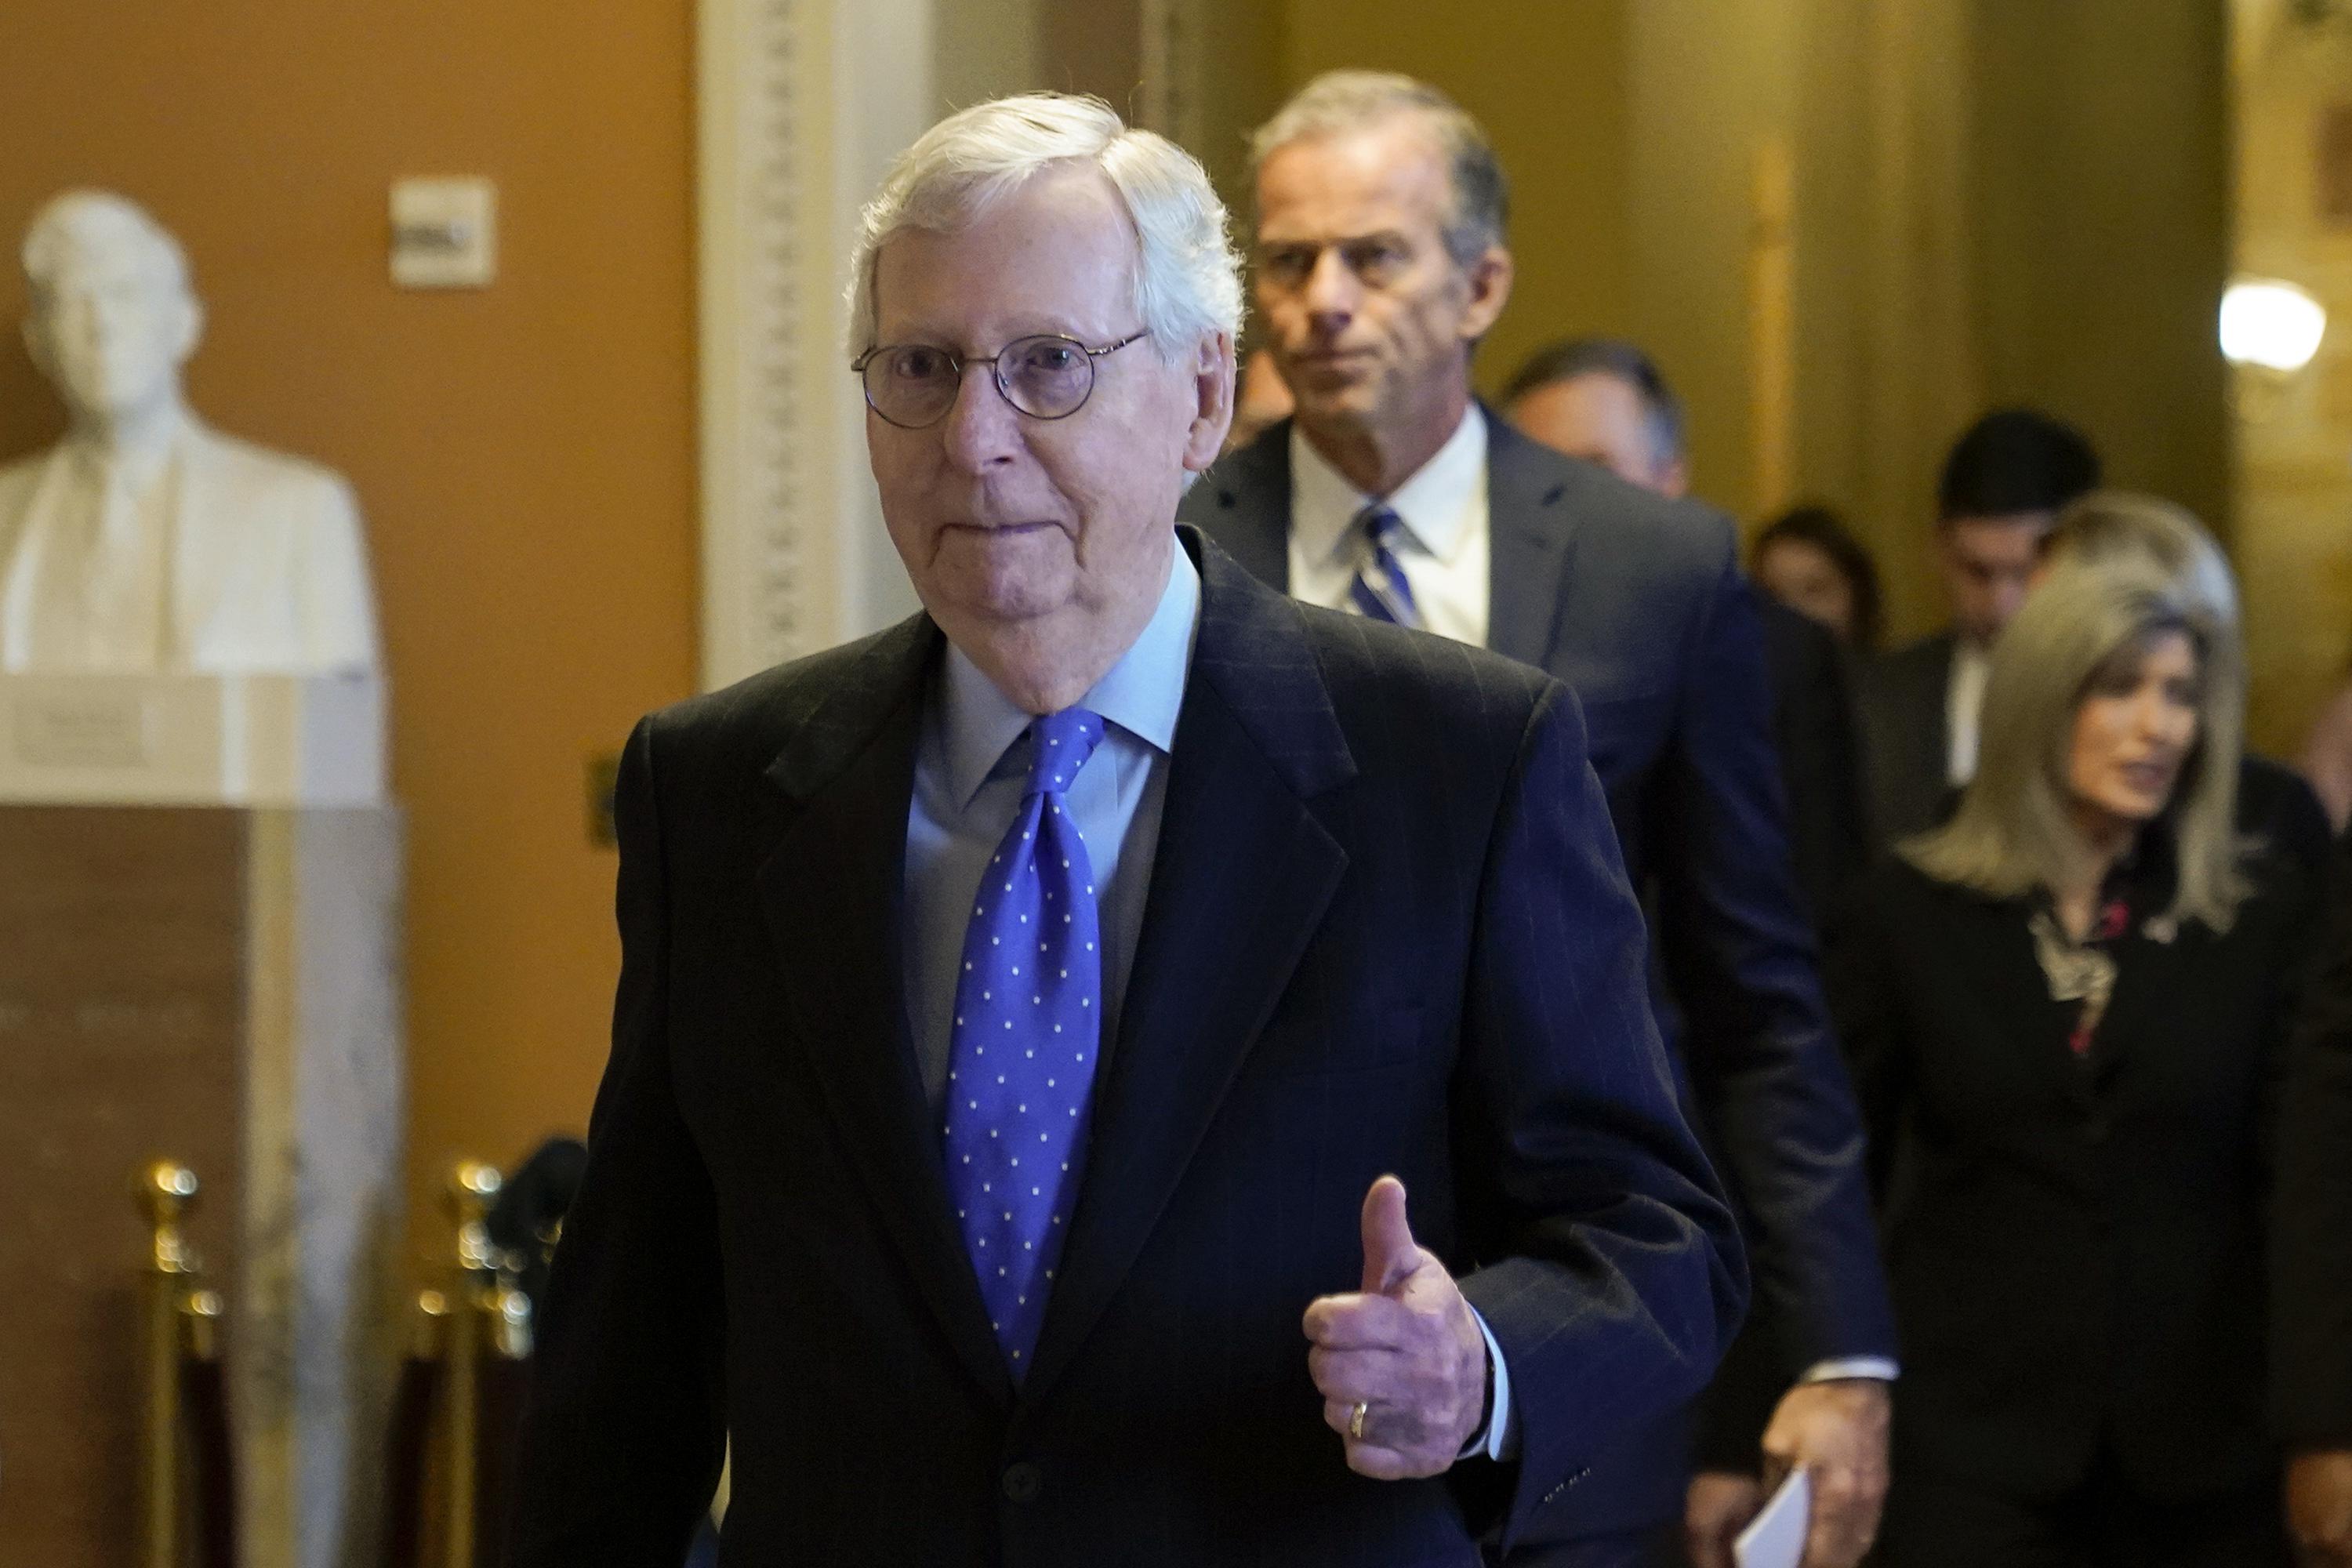 McConnell reelected Senate GOP leader: ‘Not going anywhere’ – The Associated Press